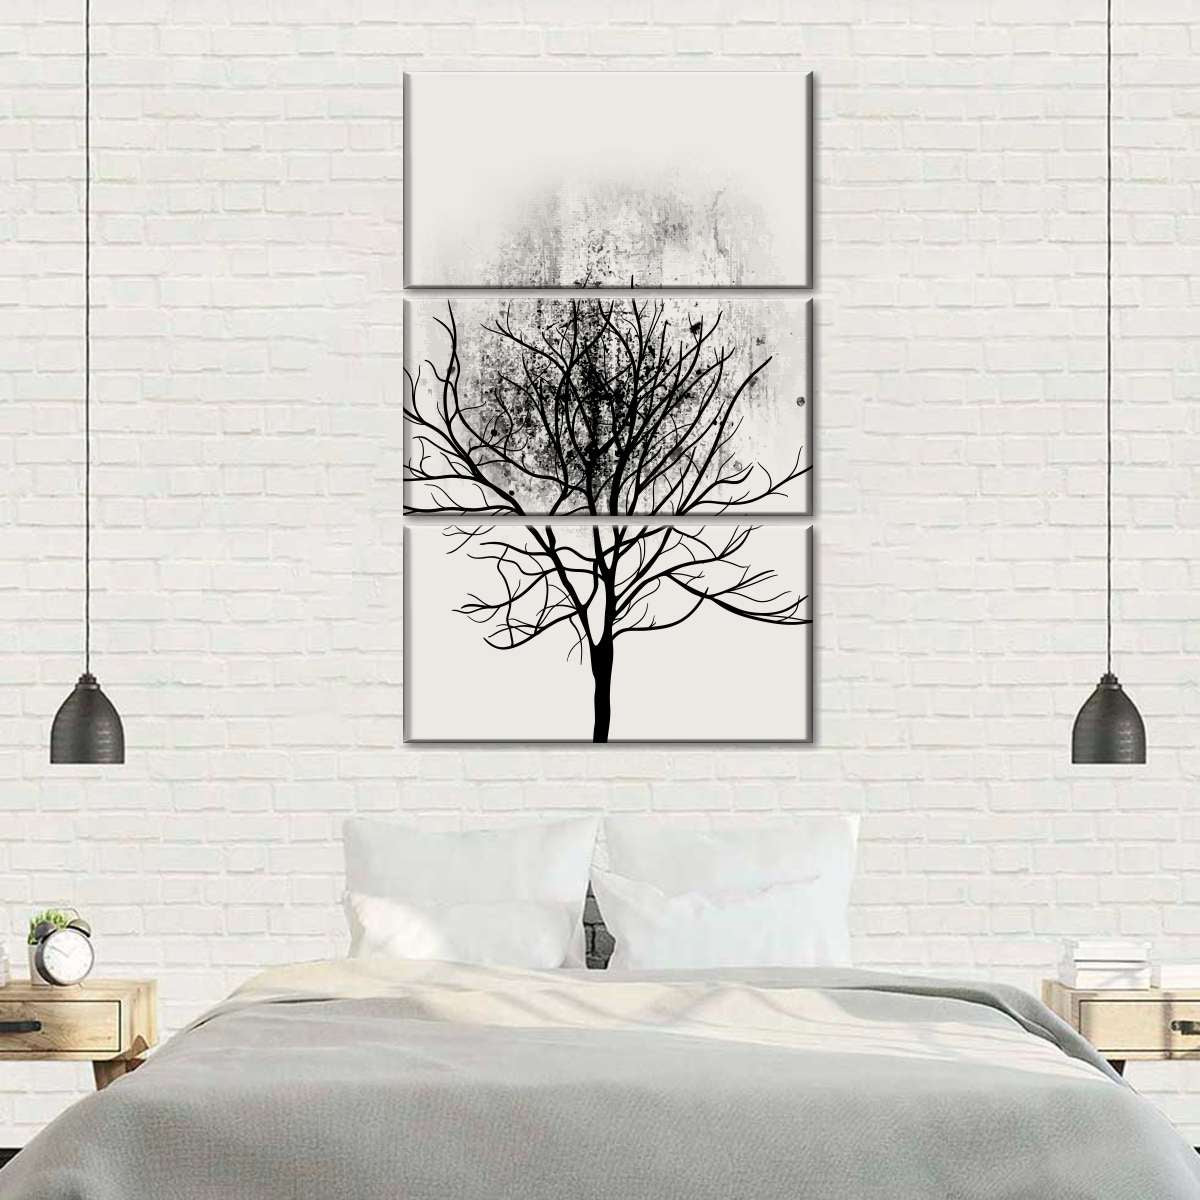 Awesome Black and White Bedroom Decor Ideas